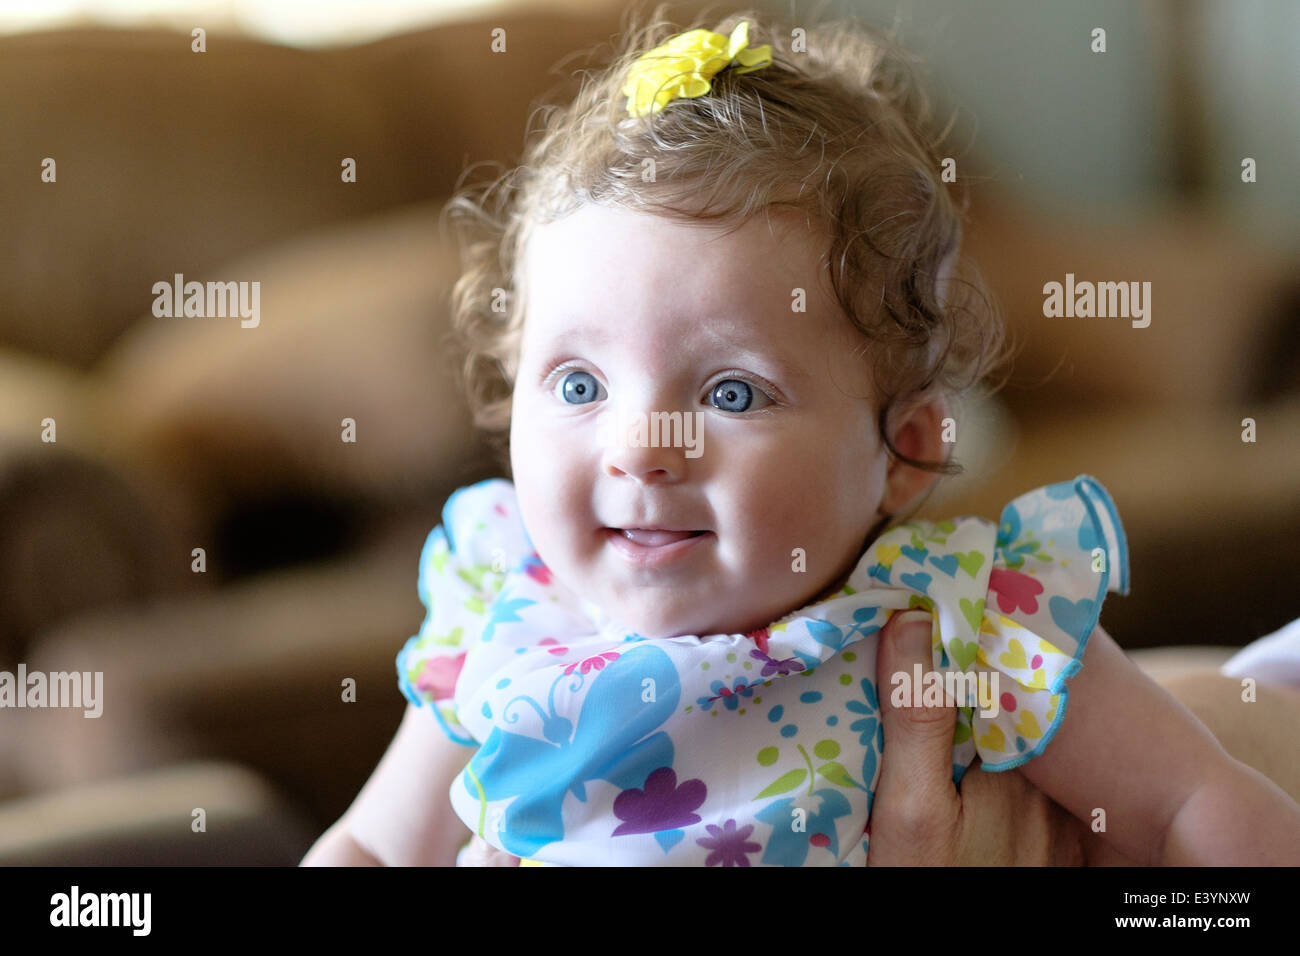 A three month old Caucasian infant girl being held by an adult and smiling. Stock Photo